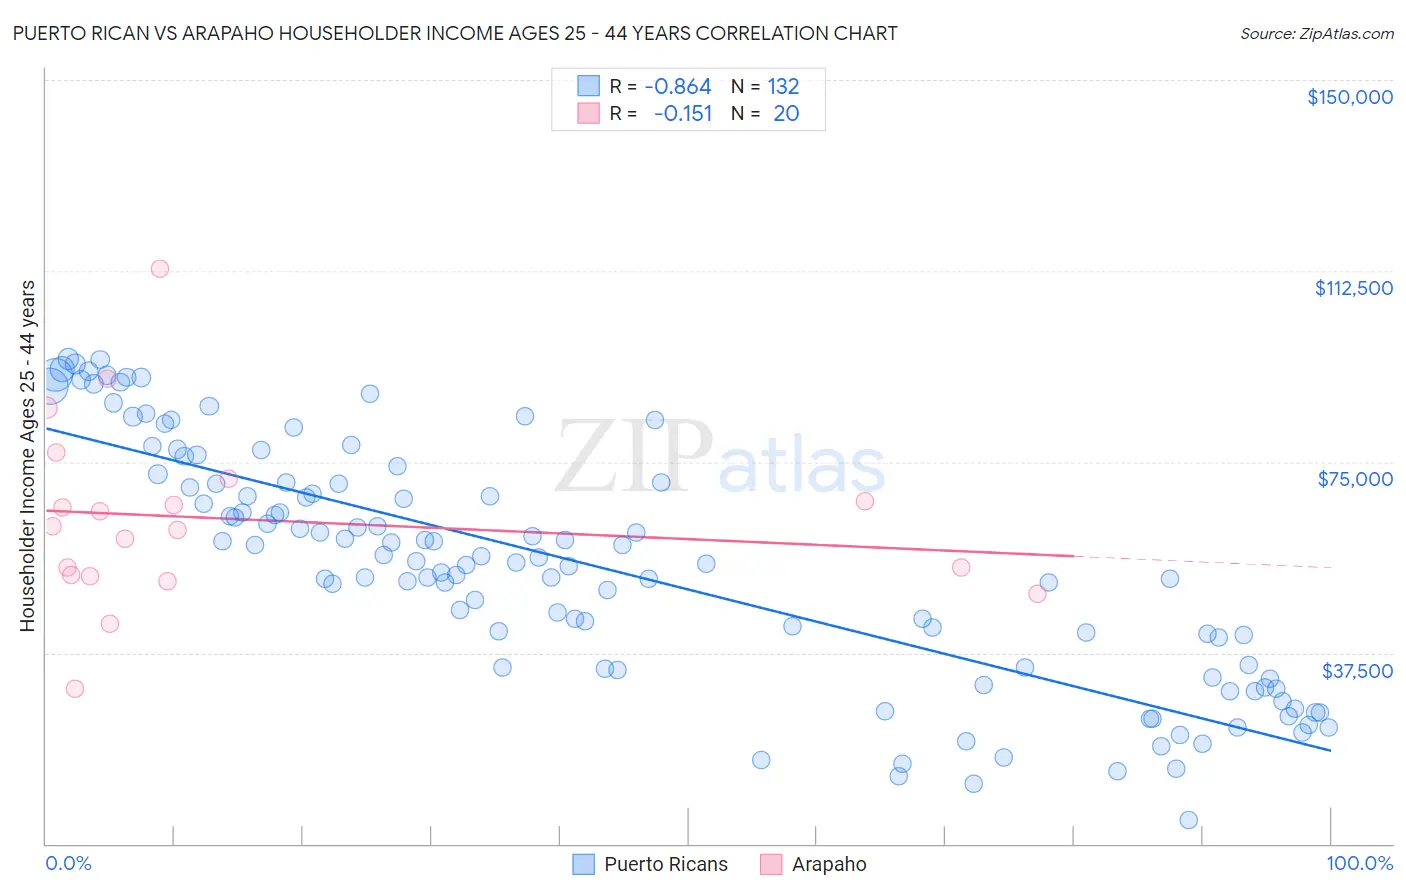 Puerto Rican vs Arapaho Householder Income Ages 25 - 44 years